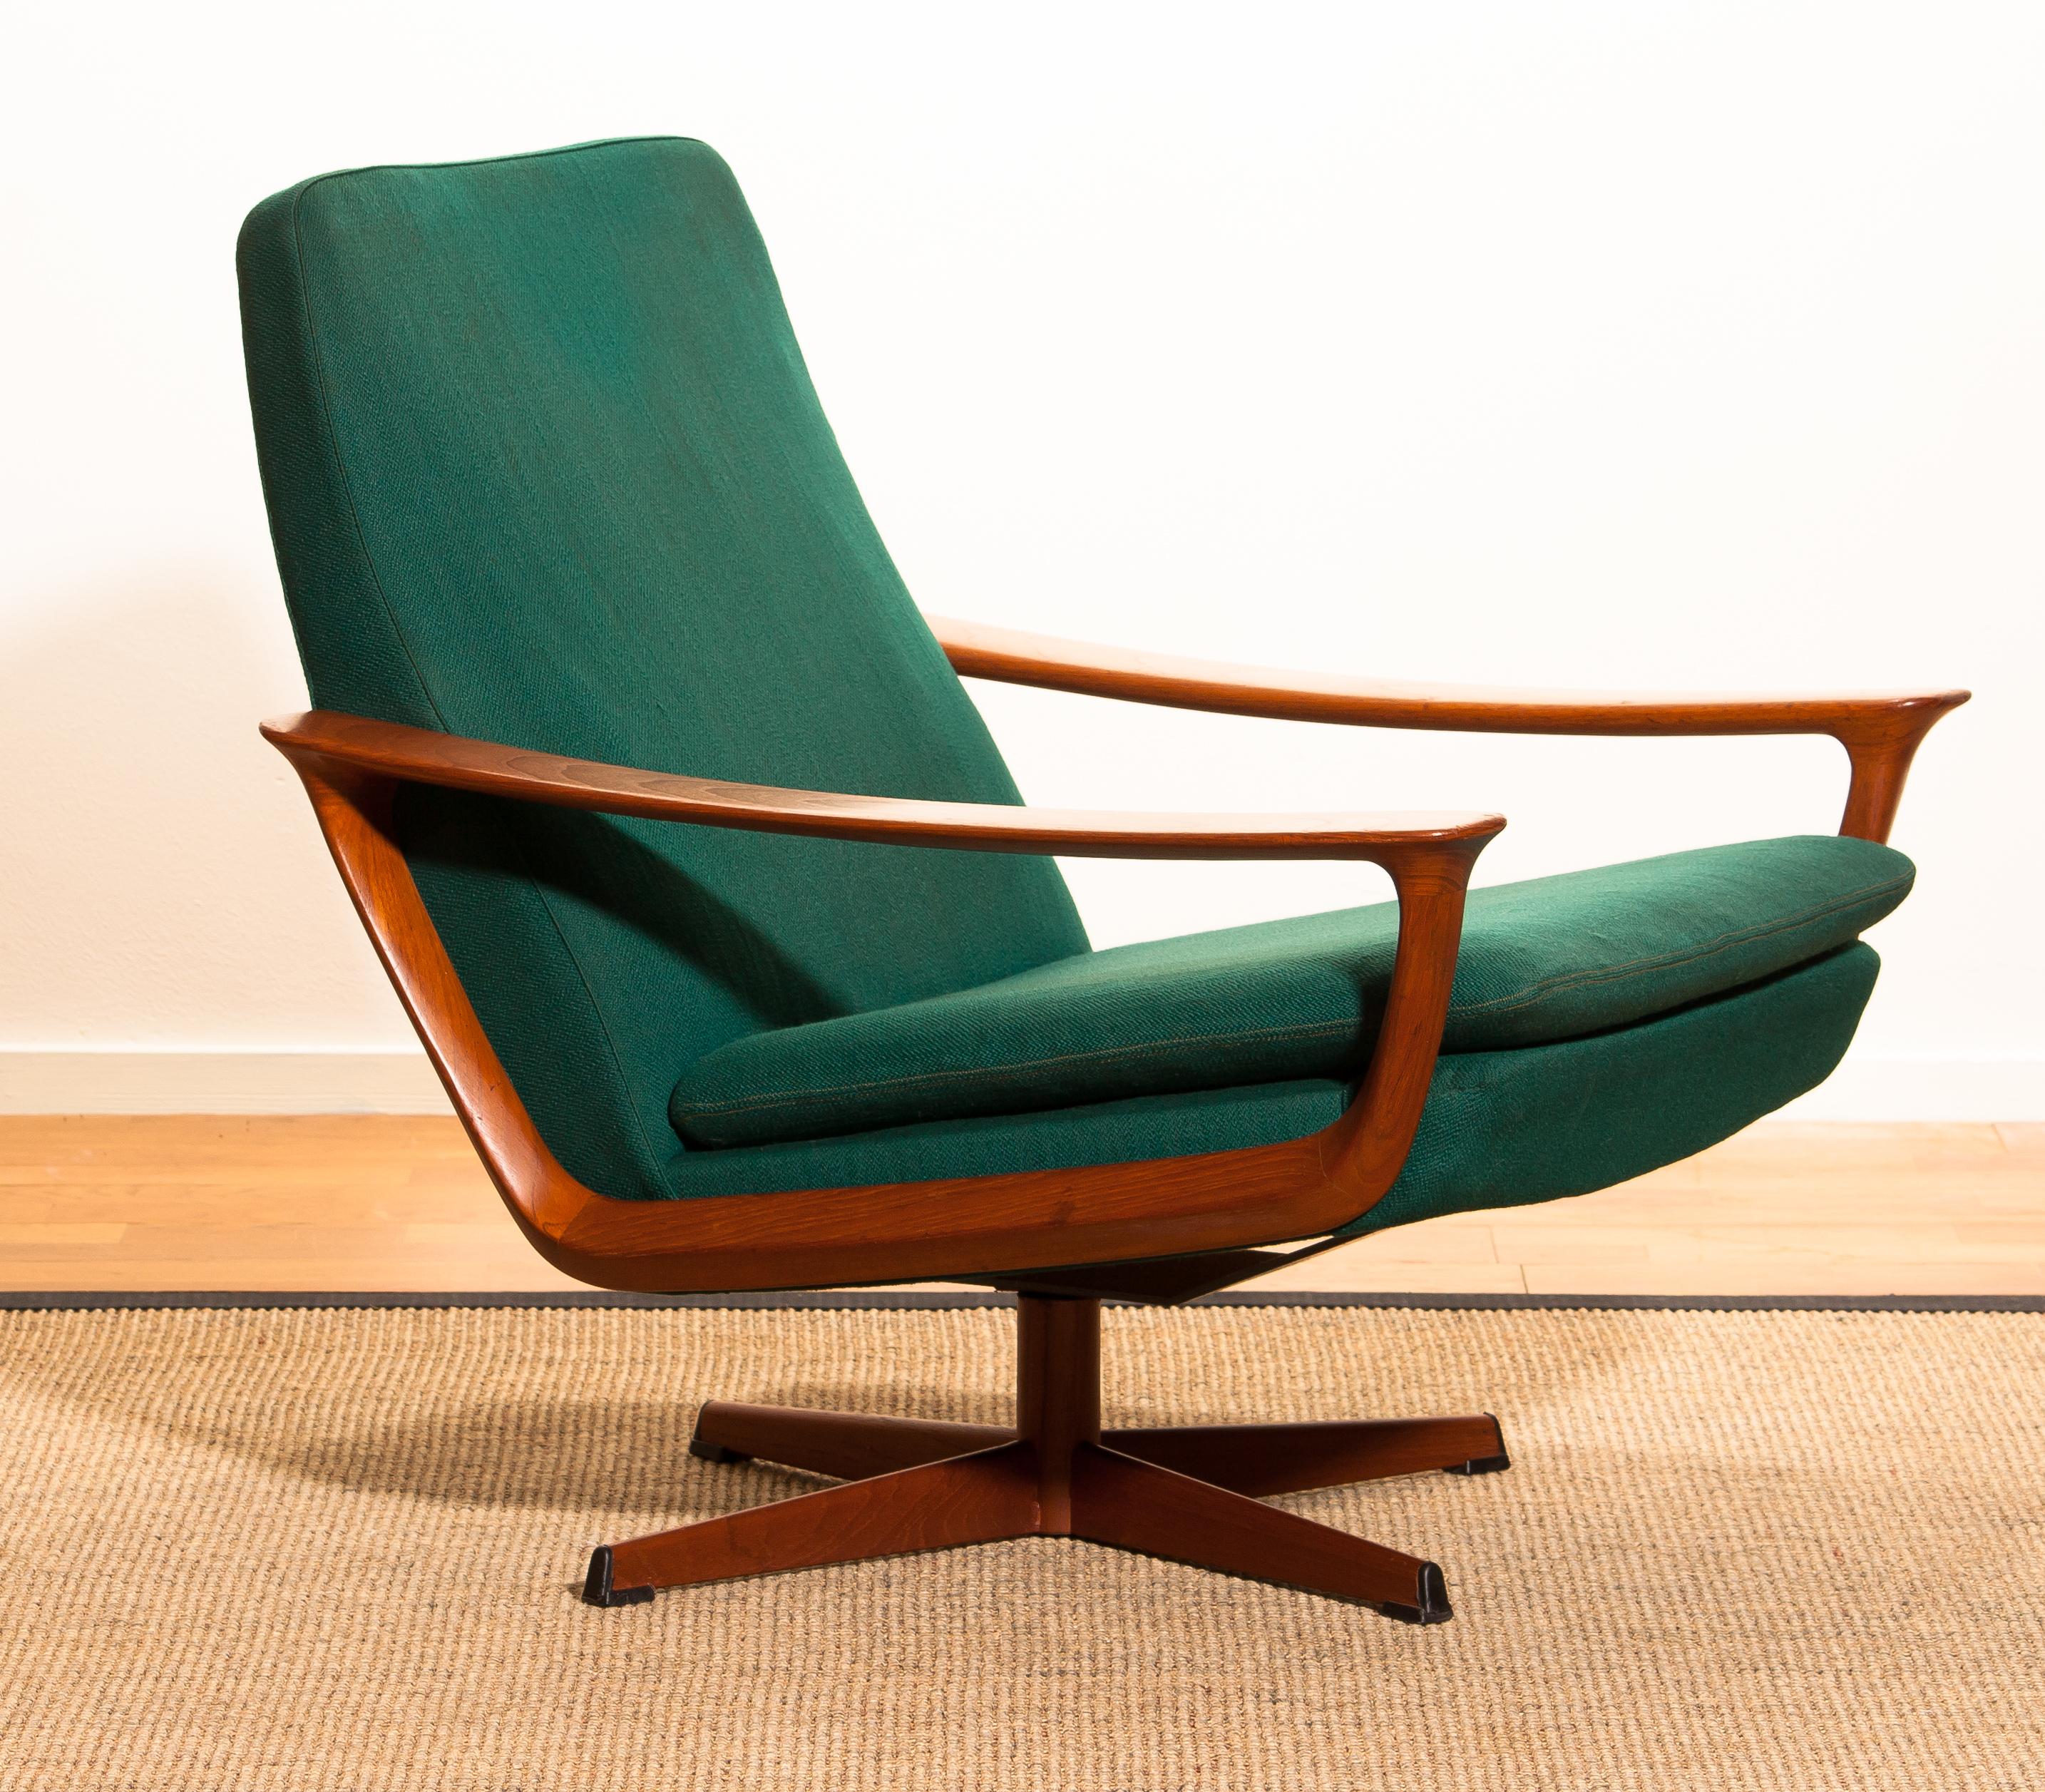 Extremely rare teak swivel chair by Johannes Andersen for Trensum, Denmark.
The chair is in excellent condition.
Upholstery and padding shows wear consistent with age and use.
Period 1960.
The dimensions are: Height 73 cm, 29 inch; wide 71 cm,